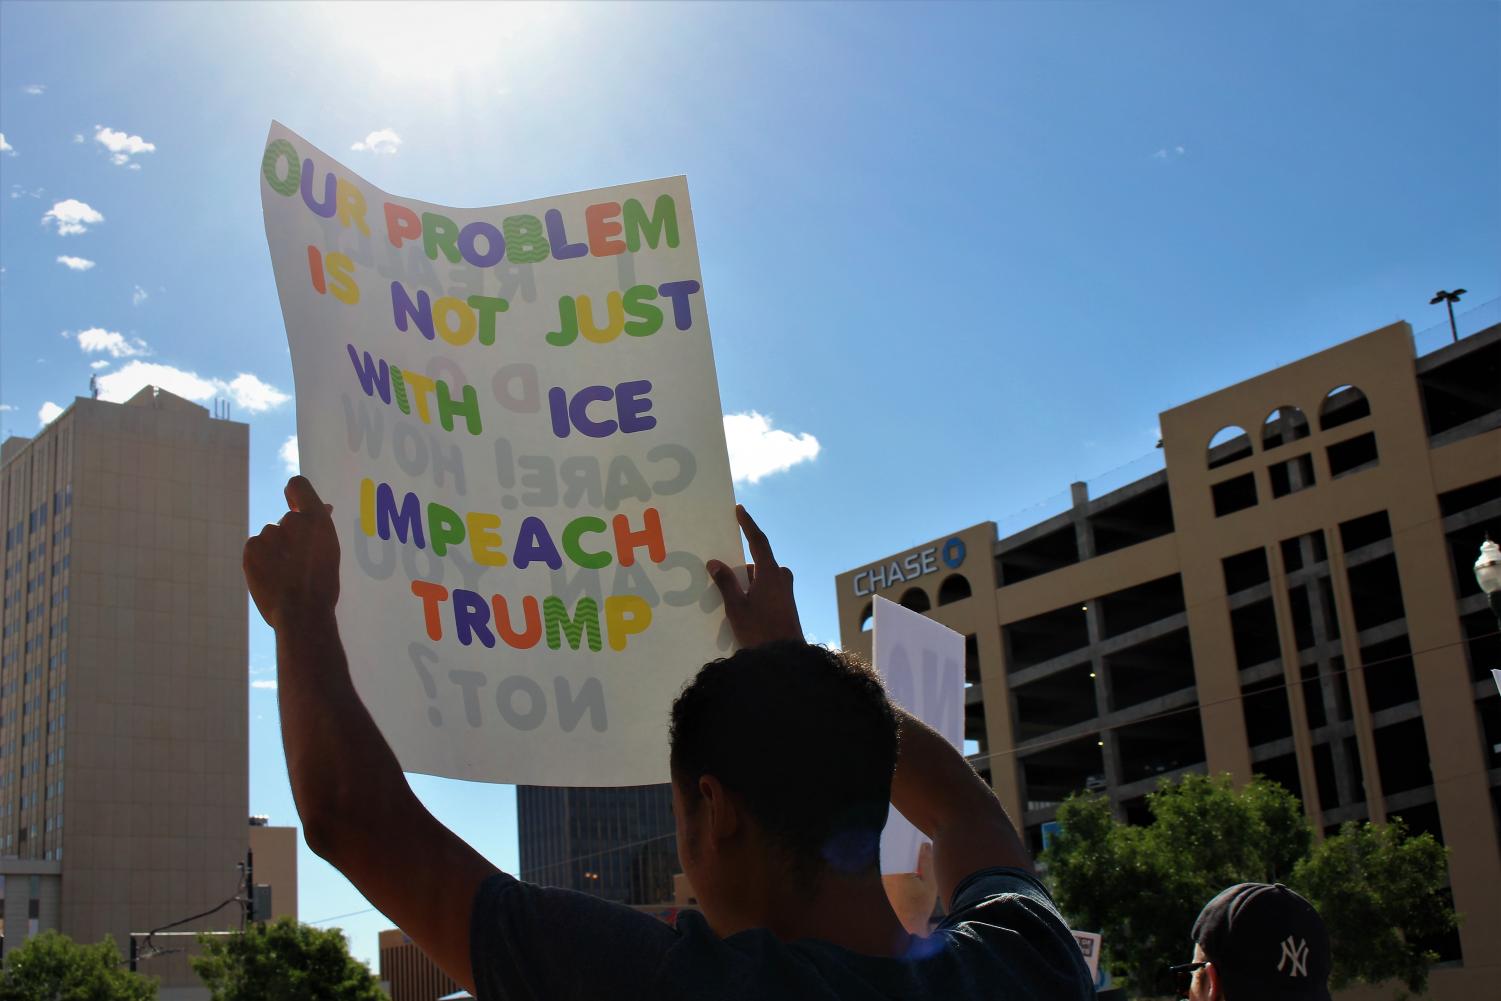 Families+Belong+Together+and+Free+march+brings+unity